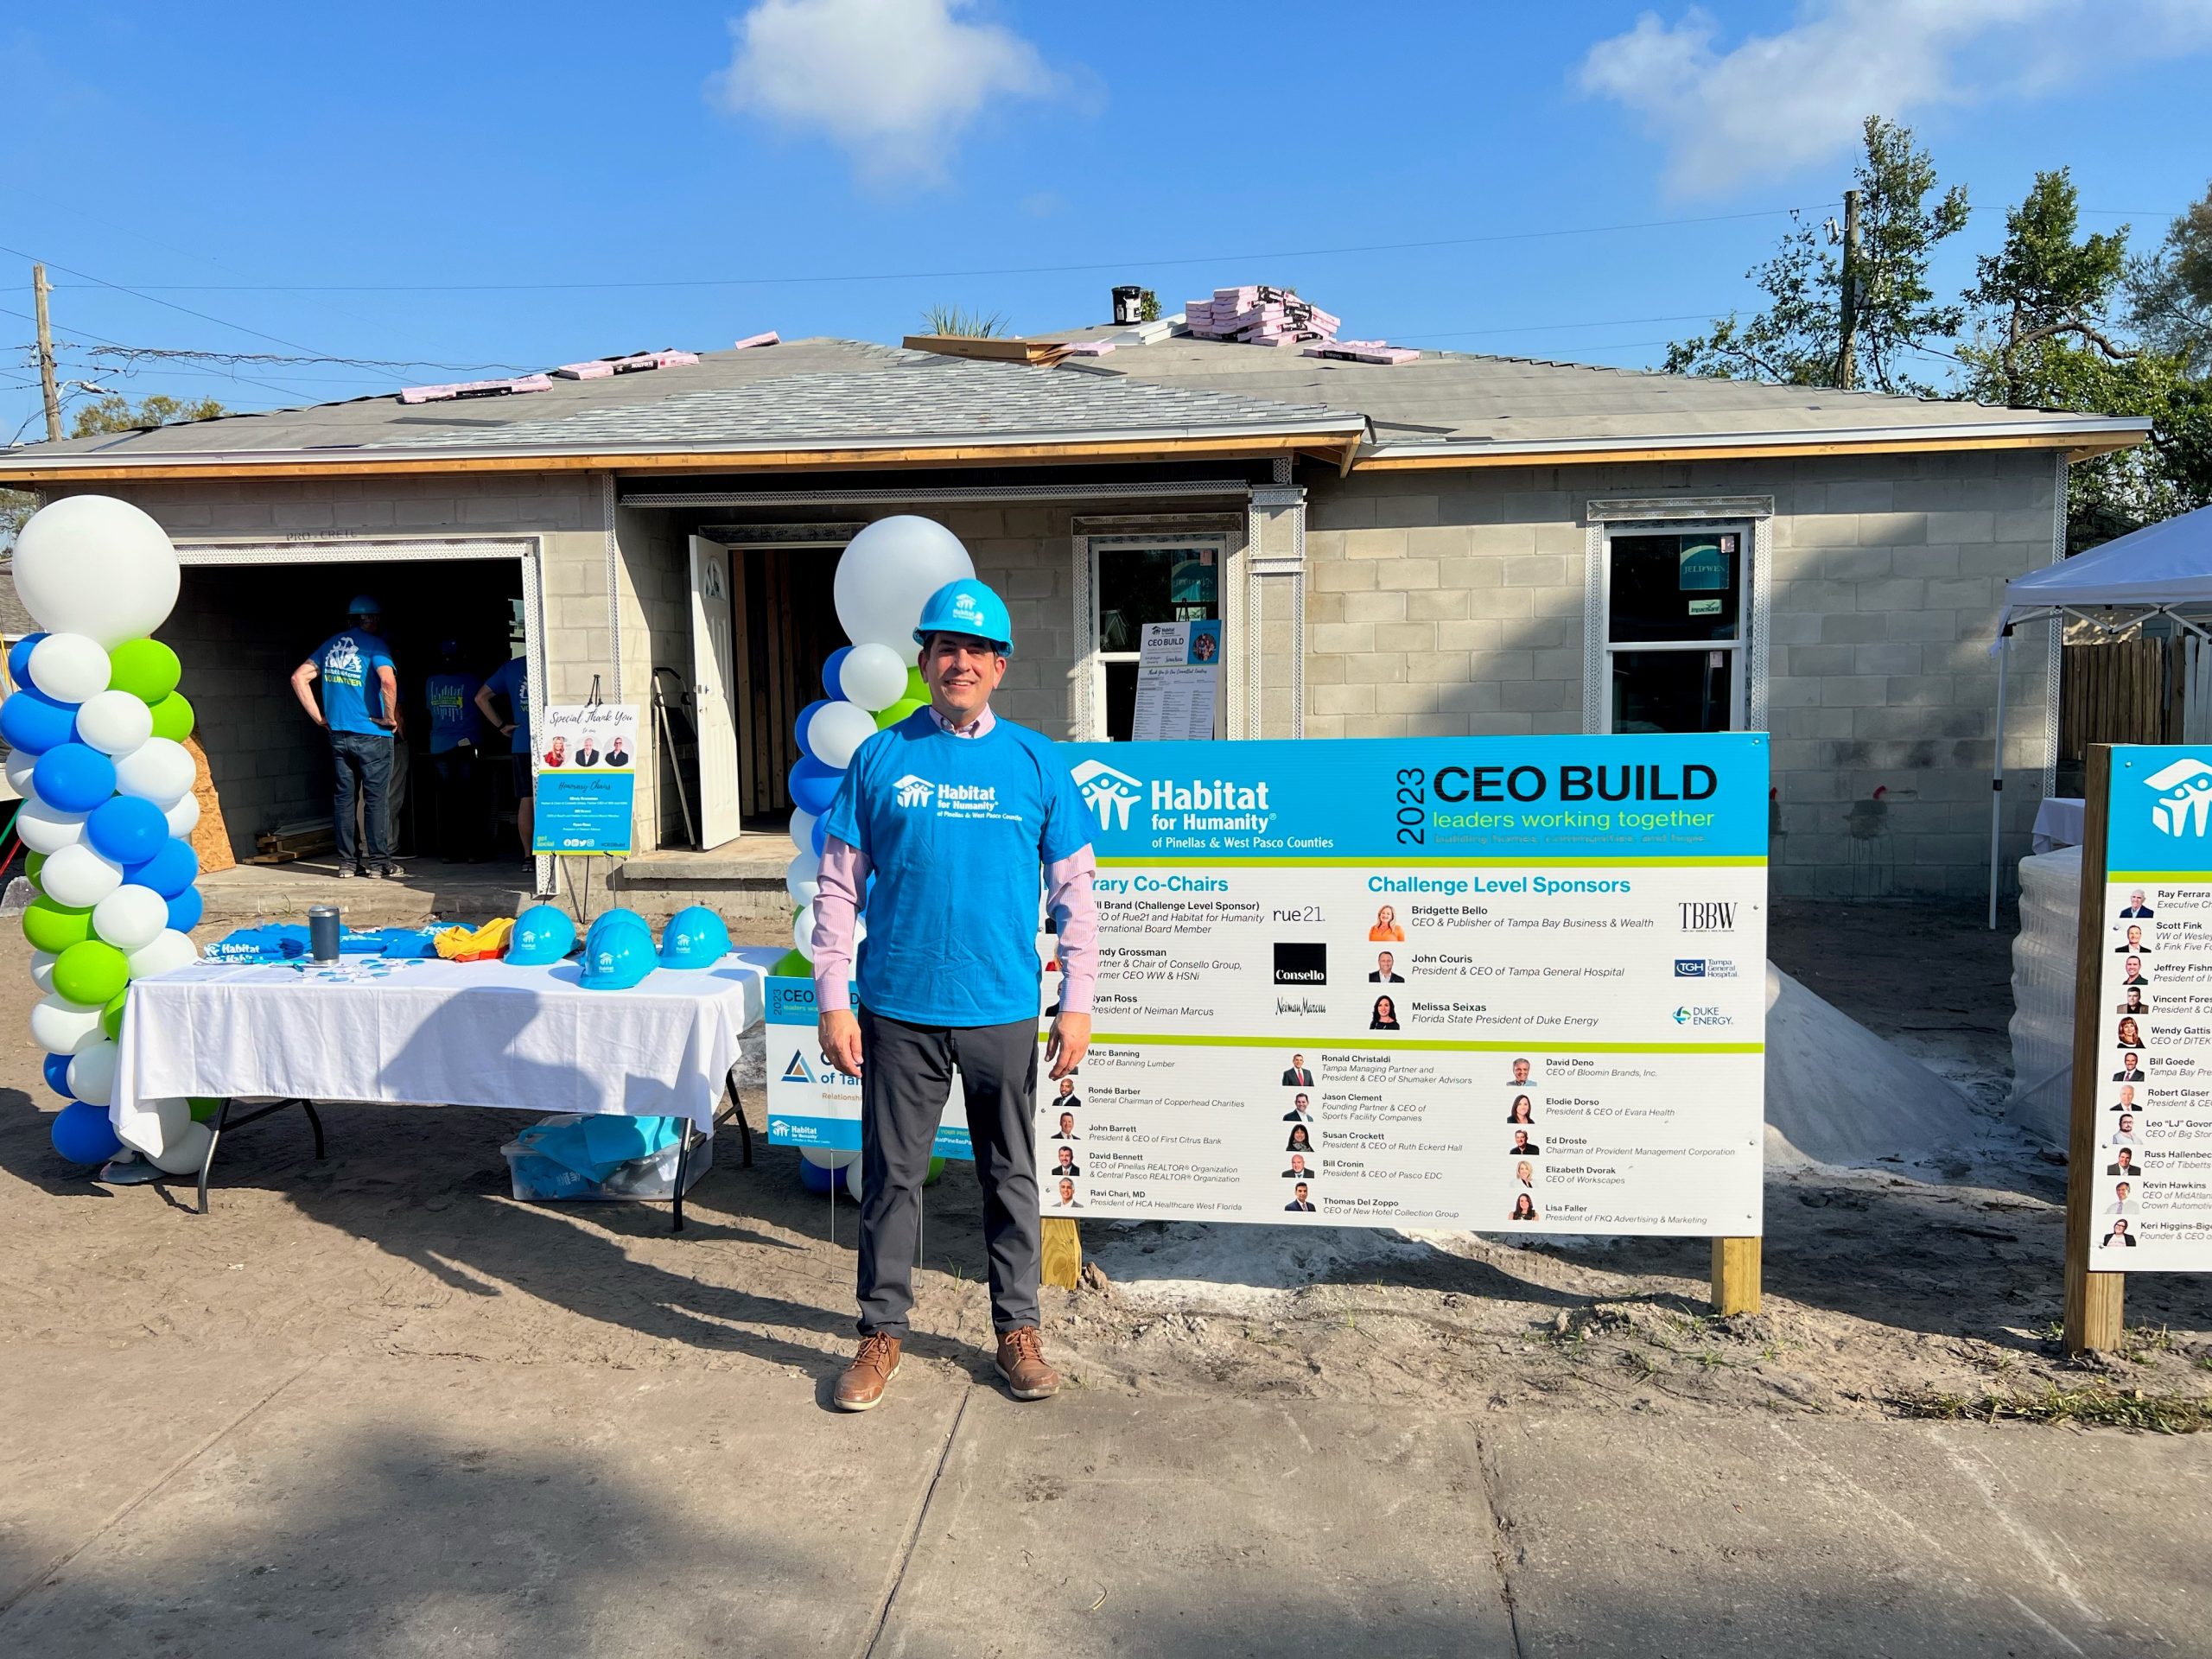 With Tampa Bay’s Affordable Housing Crisis, Shumaker’s Ron Christaldi Helps Build a Home for a Family in Need